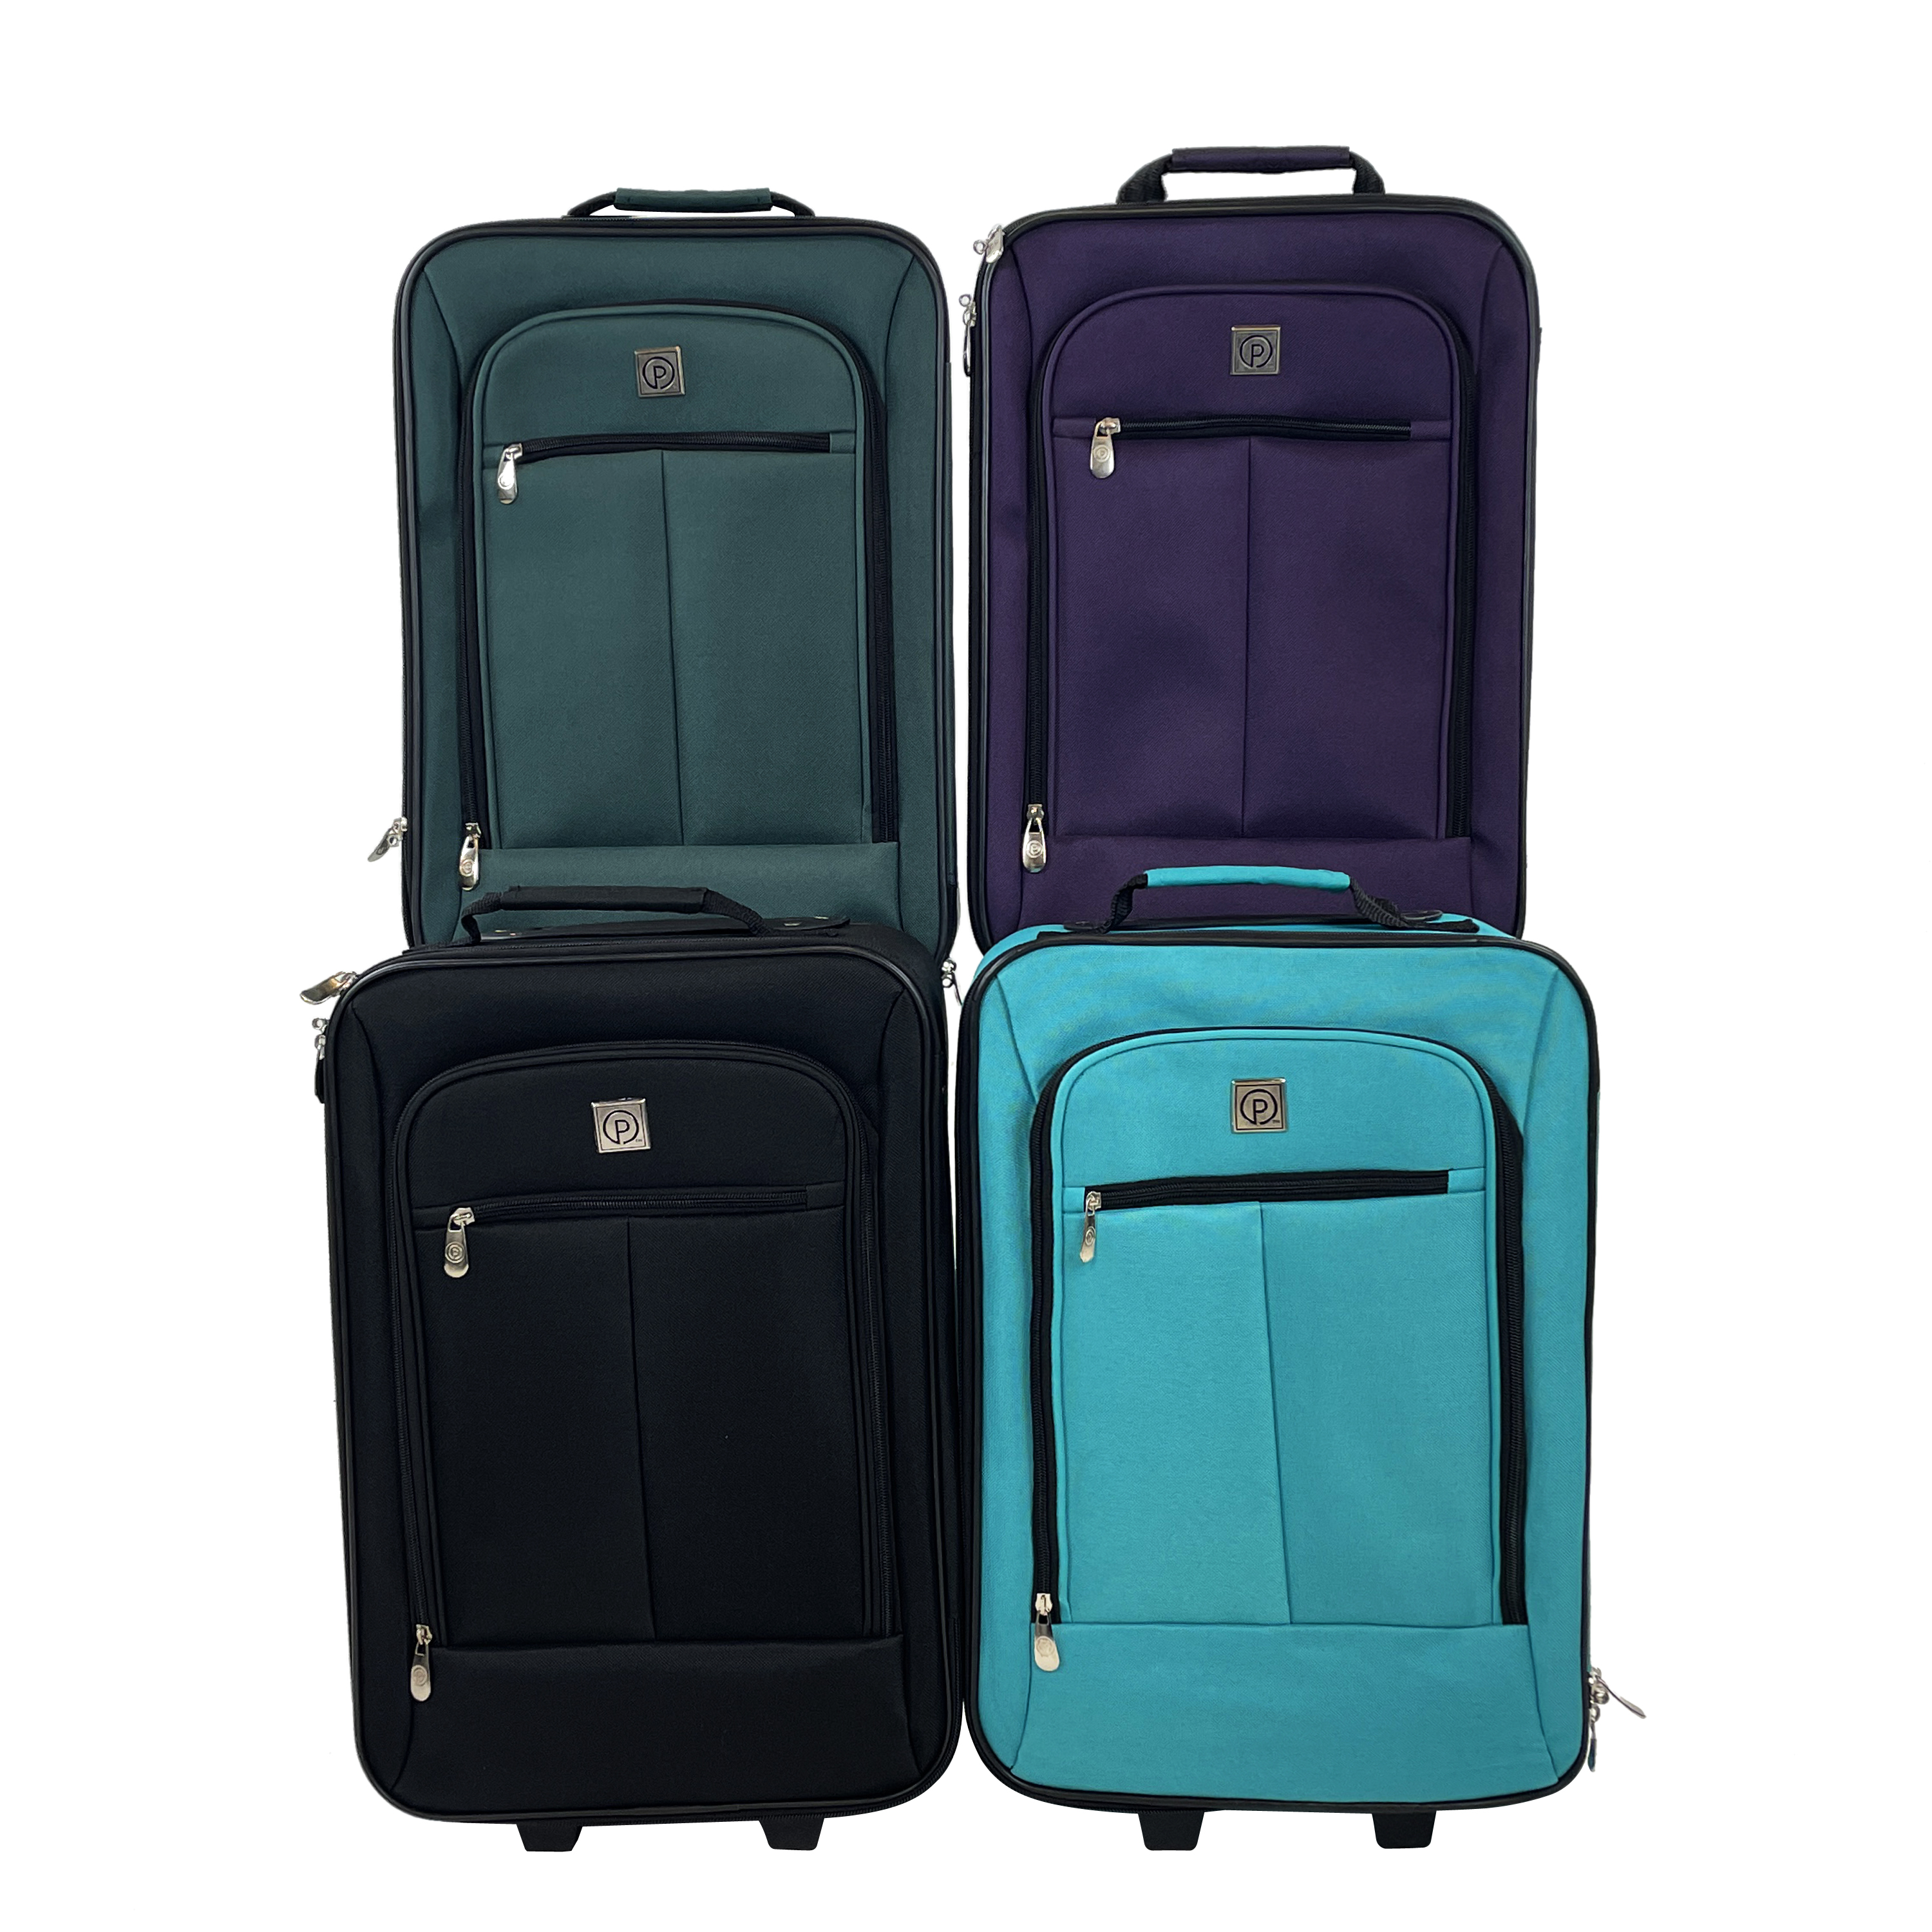 Protege Pilot Case 18" Softside Carry-on Luggage, Green - image 3 of 7